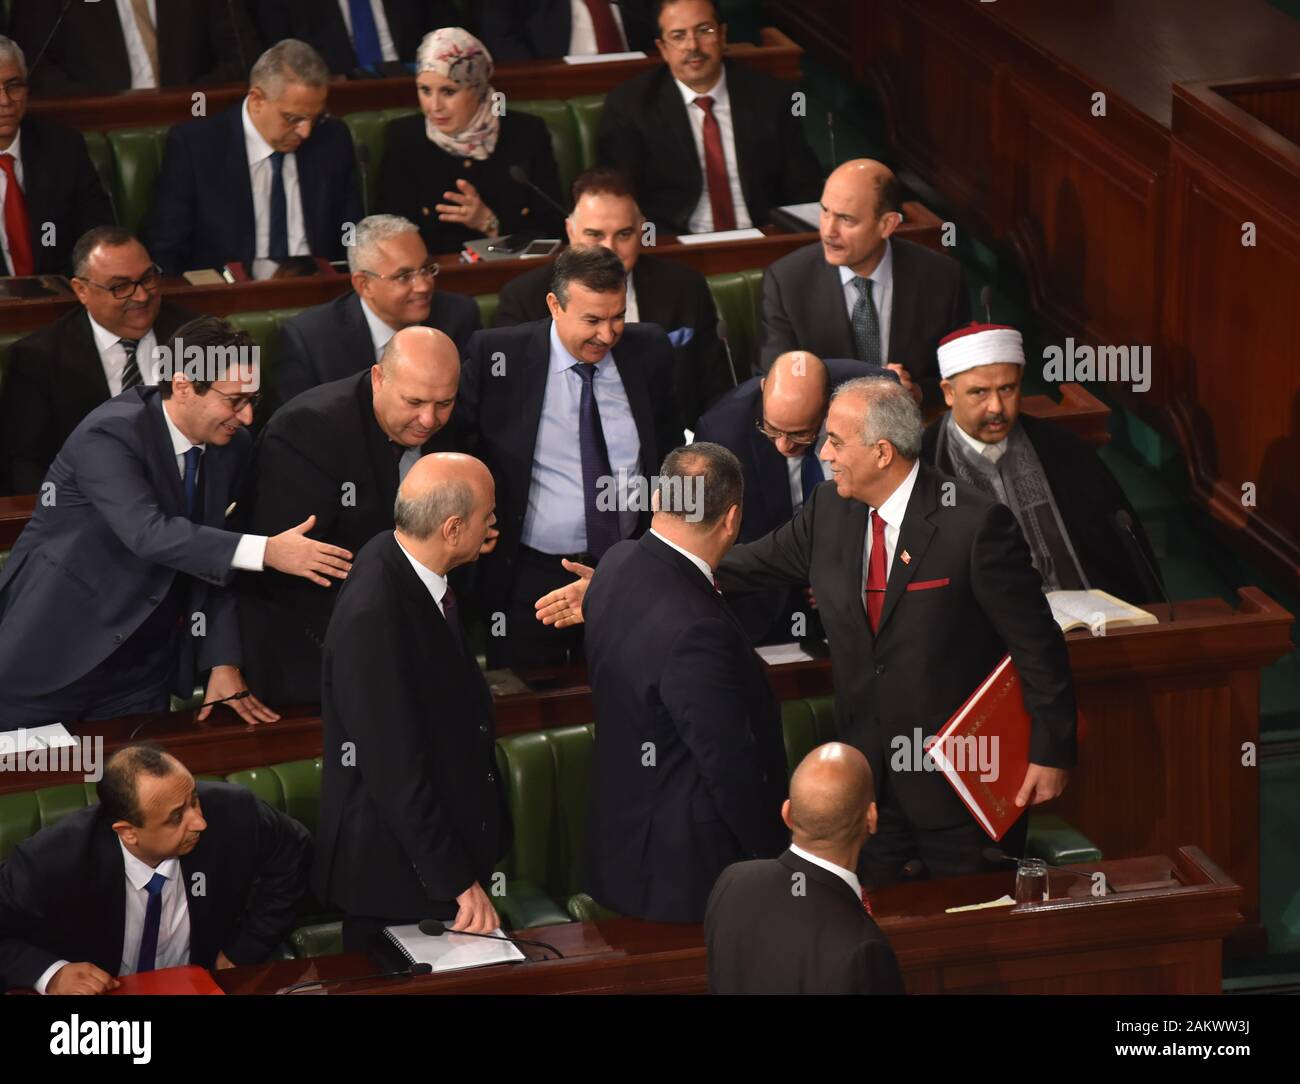 Parliamentarians during a parliament plenary session for a confidence vote on a proposed cabinet line-up. Tunisia's Prime Minister-designate, Habib Jemli unveiled a proposed government composed of independent figures after months of negotiations between political parties to fill positions failed. The cabinet of 28 ministers most of whom are unknown to the general public, including four women, needs to receive parliamentary assent. Stock Photo